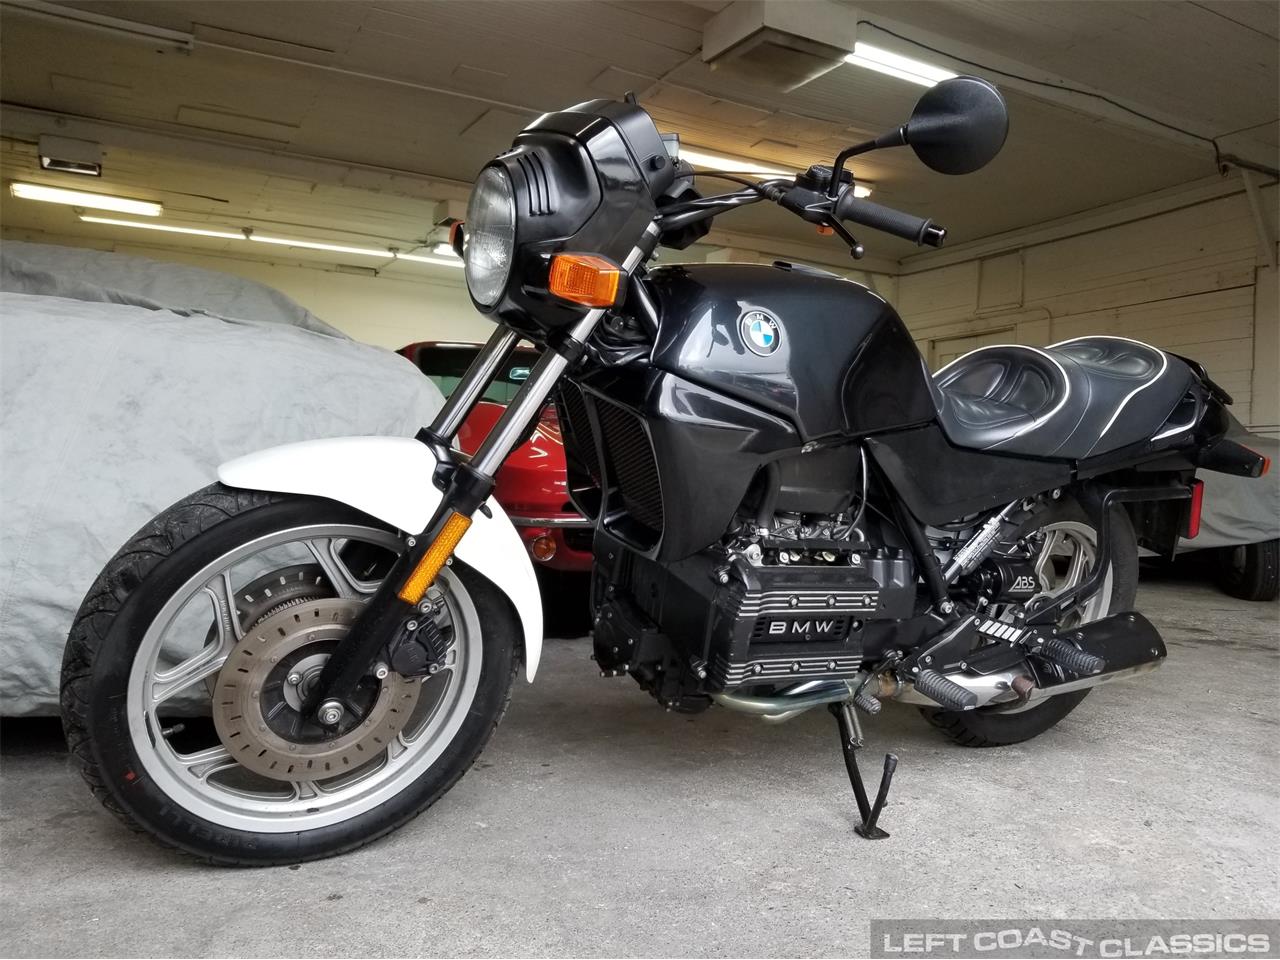 1993 BMW Motorcycle for Sale | ClassicCars.com | CC-1208035